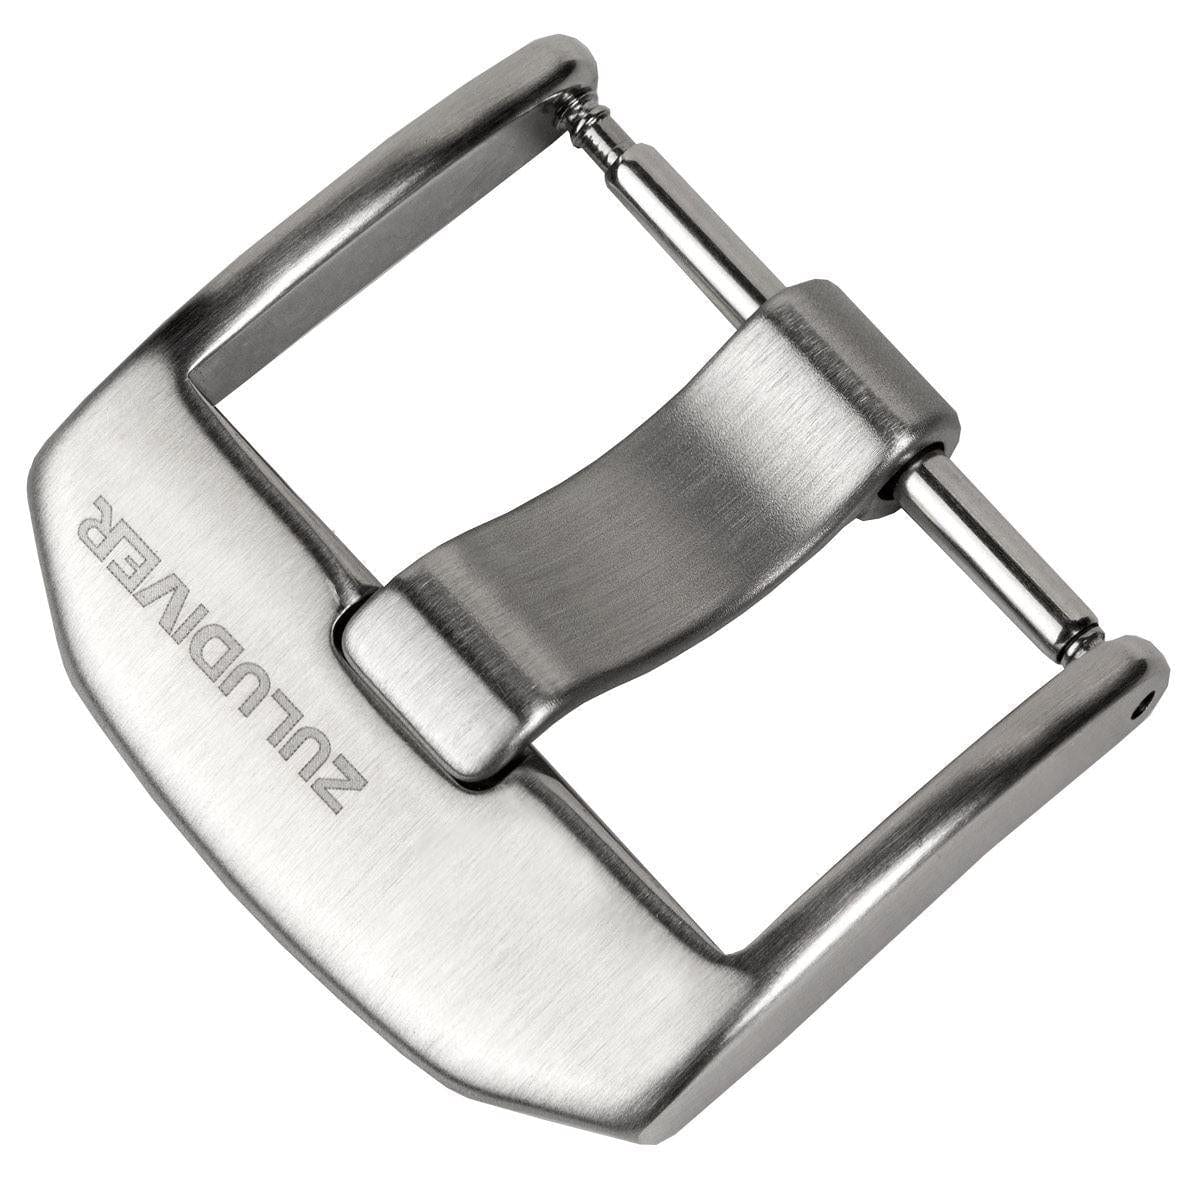 Replacement Buckle for Diver's Style Strap by ZULUDIVER - Brushed